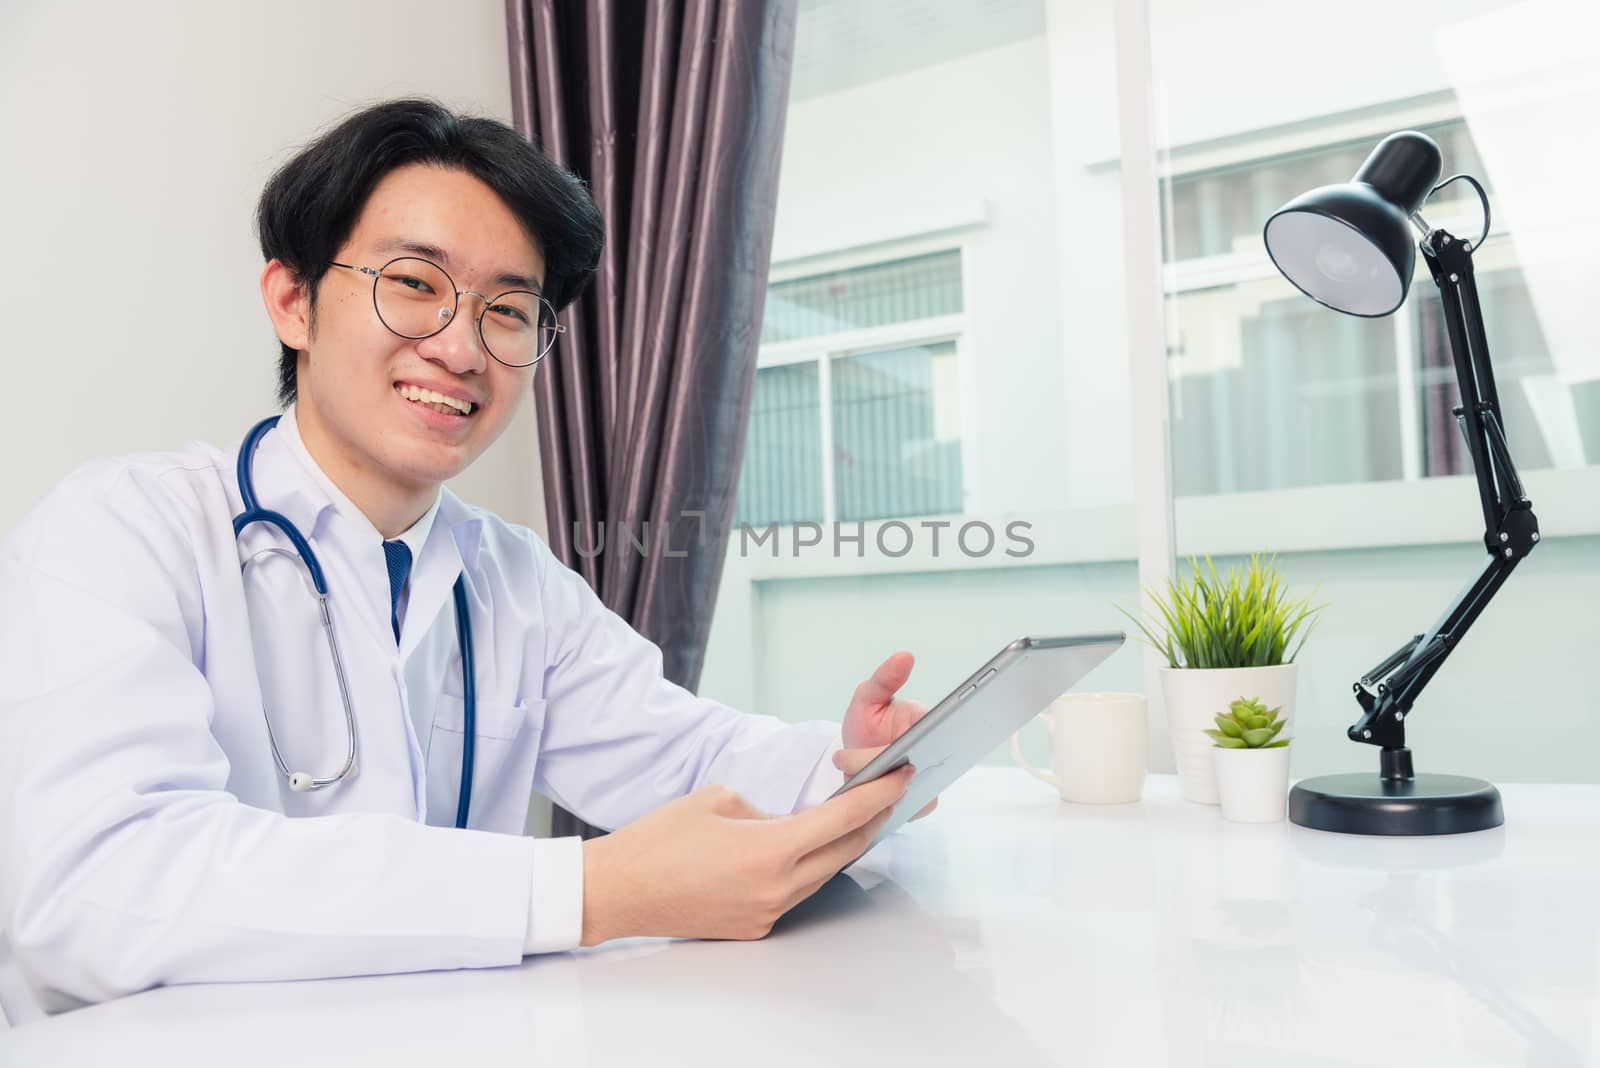 Happy Asian young doctor handsome man smile work from home office wear glasses, using black modern smart digital tablet computer on desk at hospital office, Technology healthcare and medicine concept